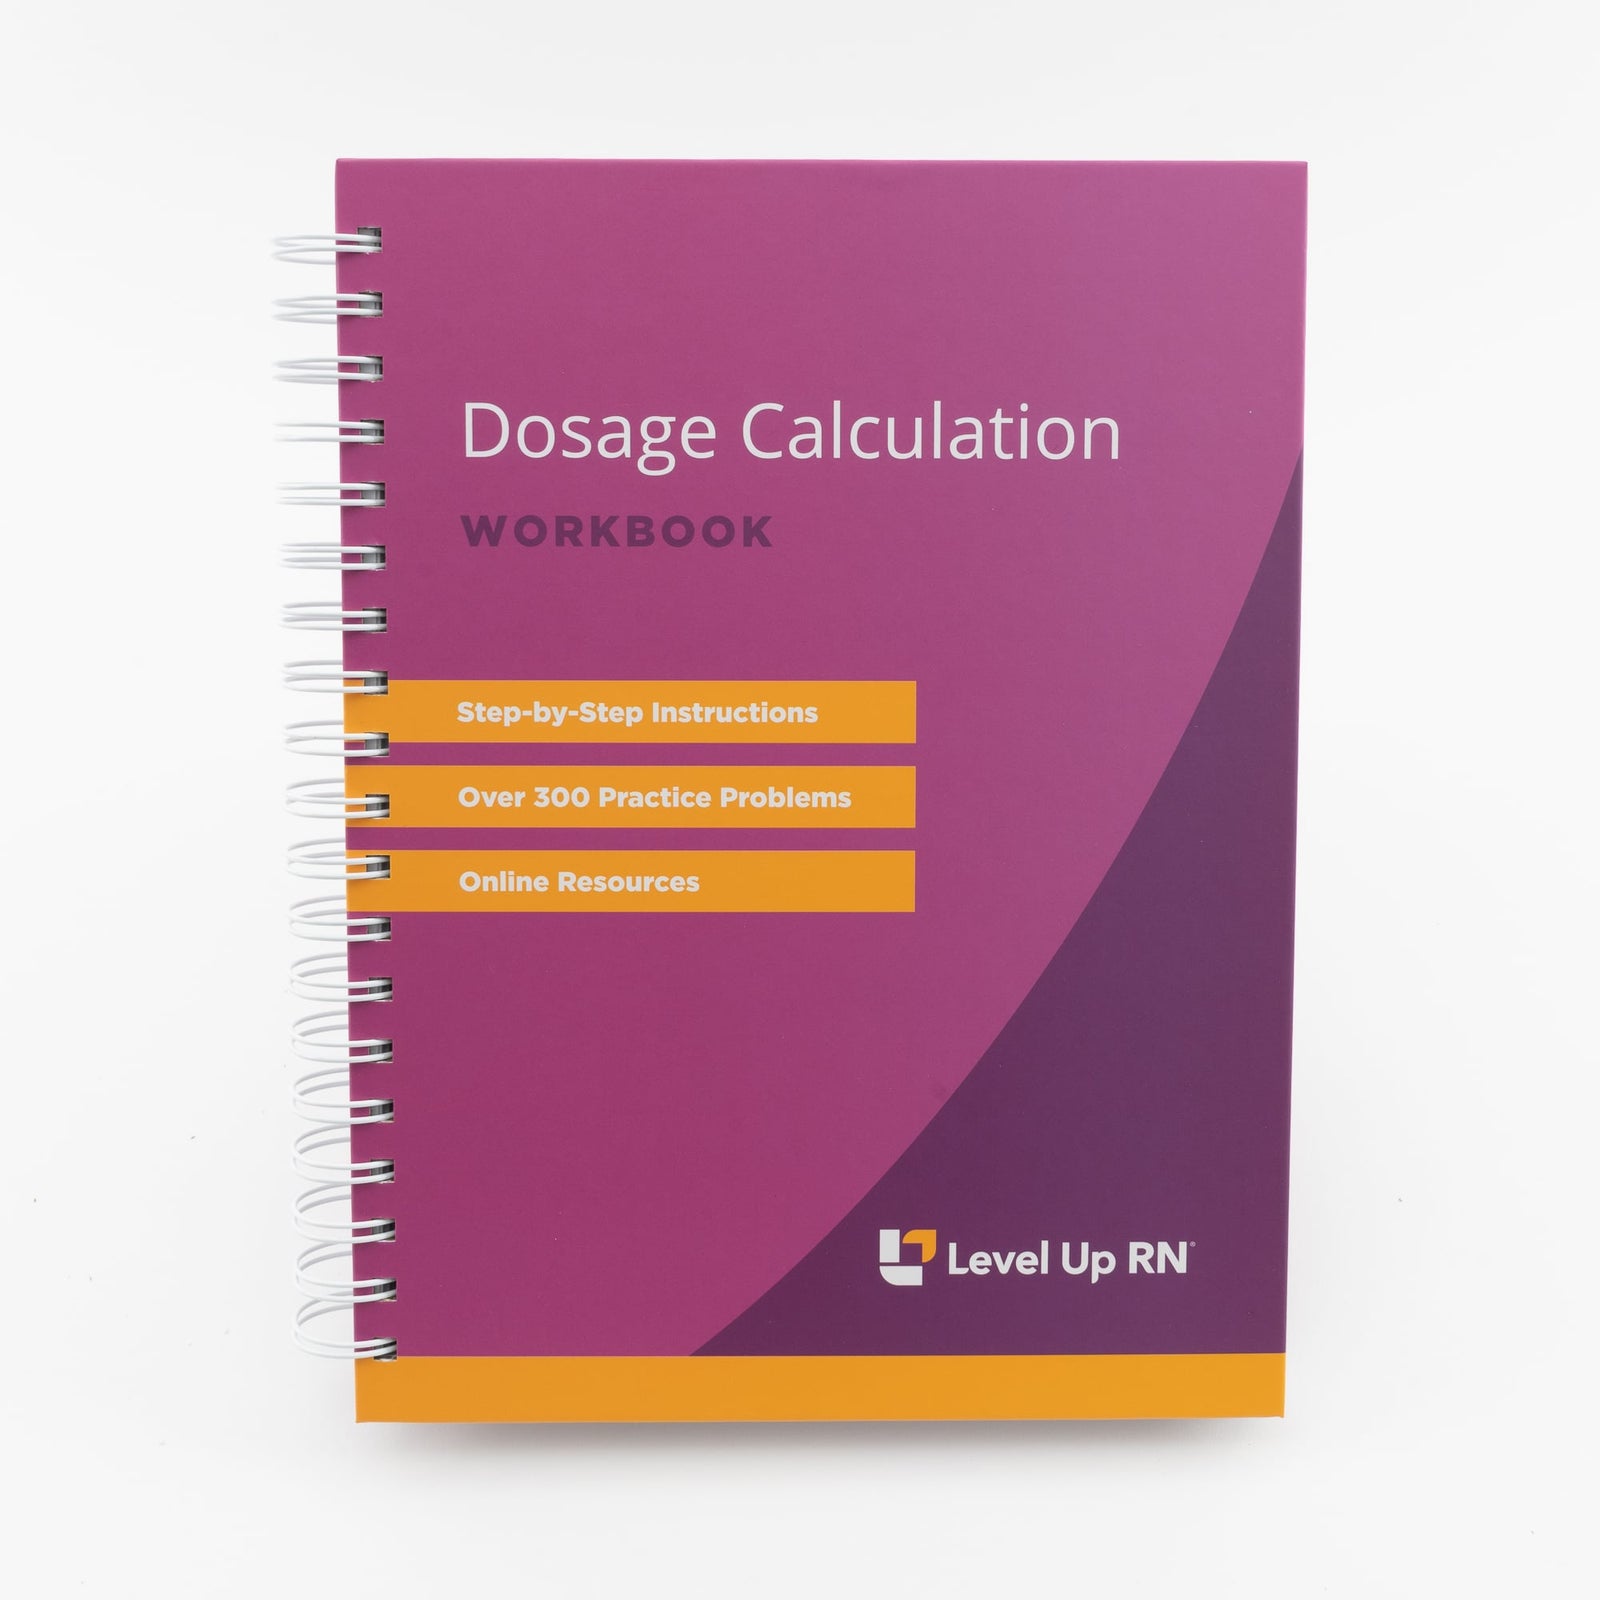 Front cover of the dosage calculation workbook